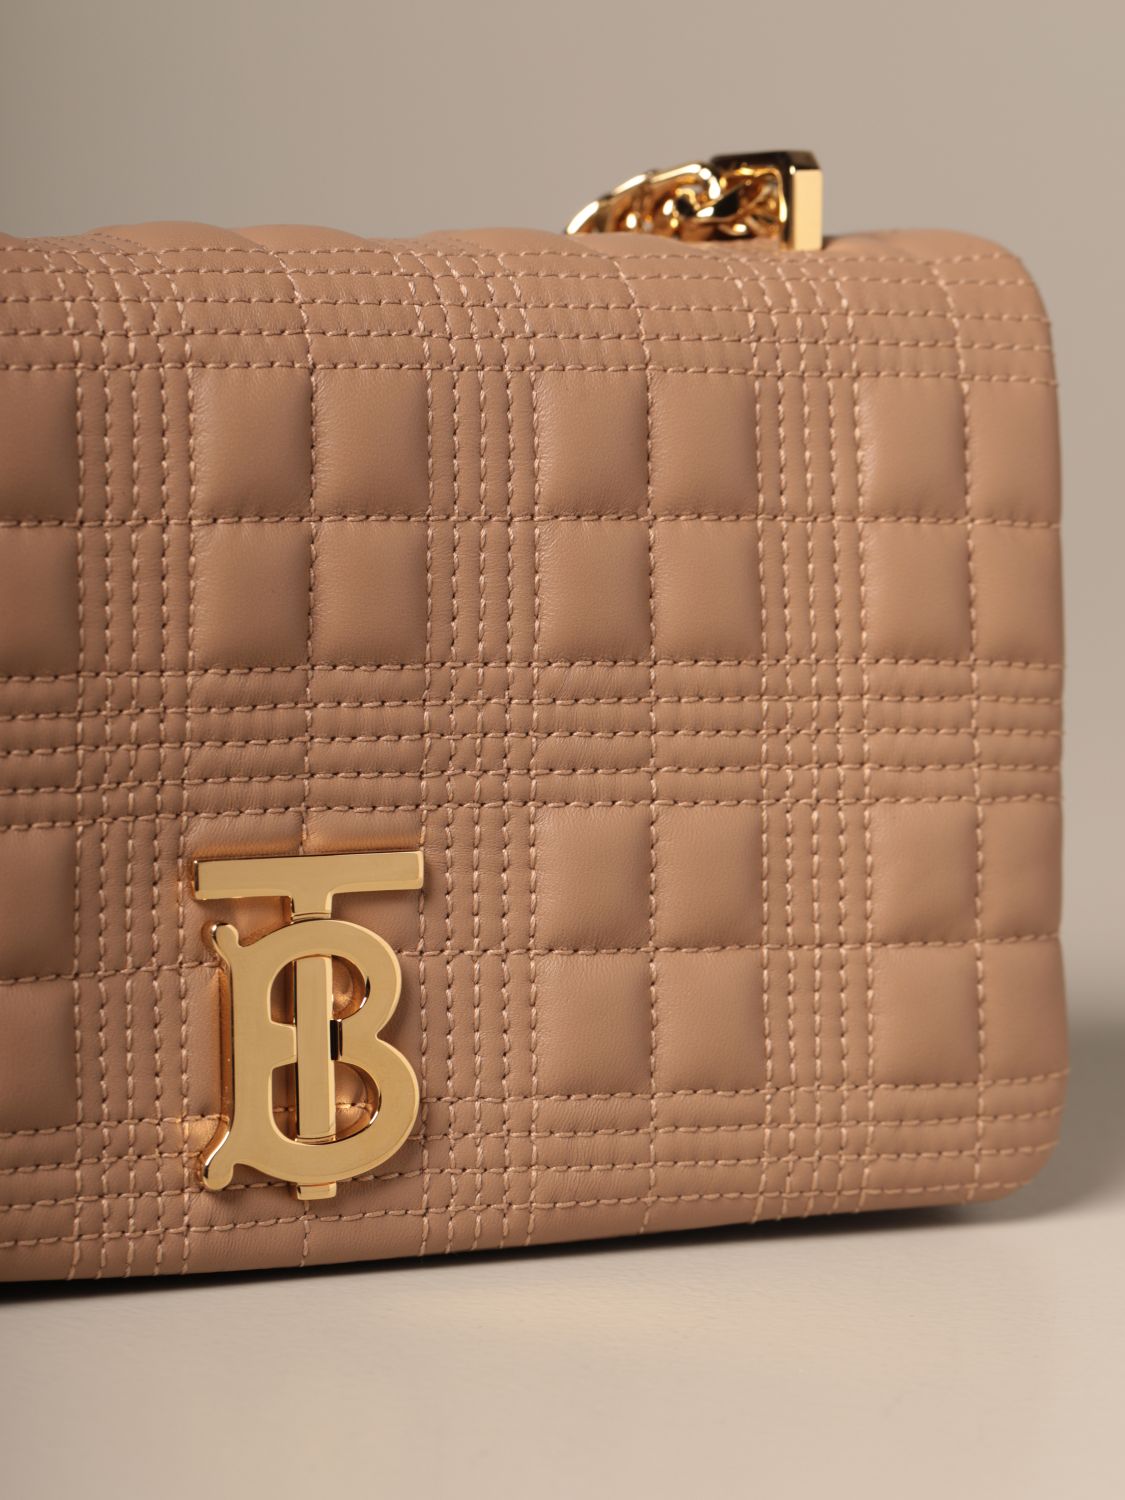 Cross body bags Burberry - Quilted Lola bag in pink - 8023889